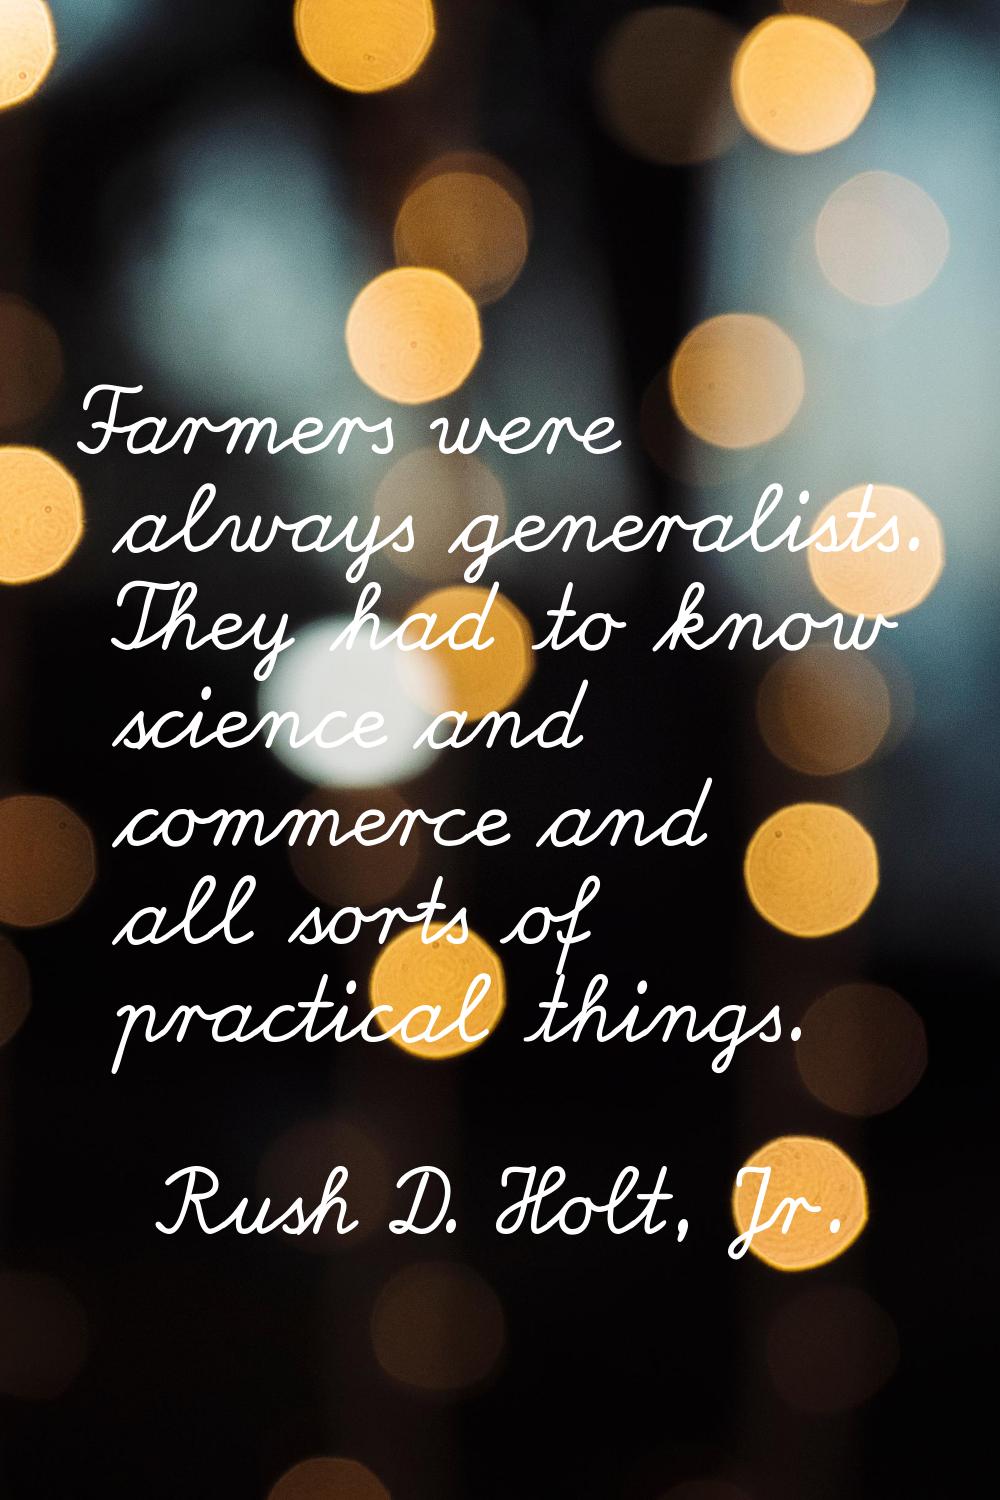 Farmers were always generalists. They had to know science and commerce and all sorts of practical t